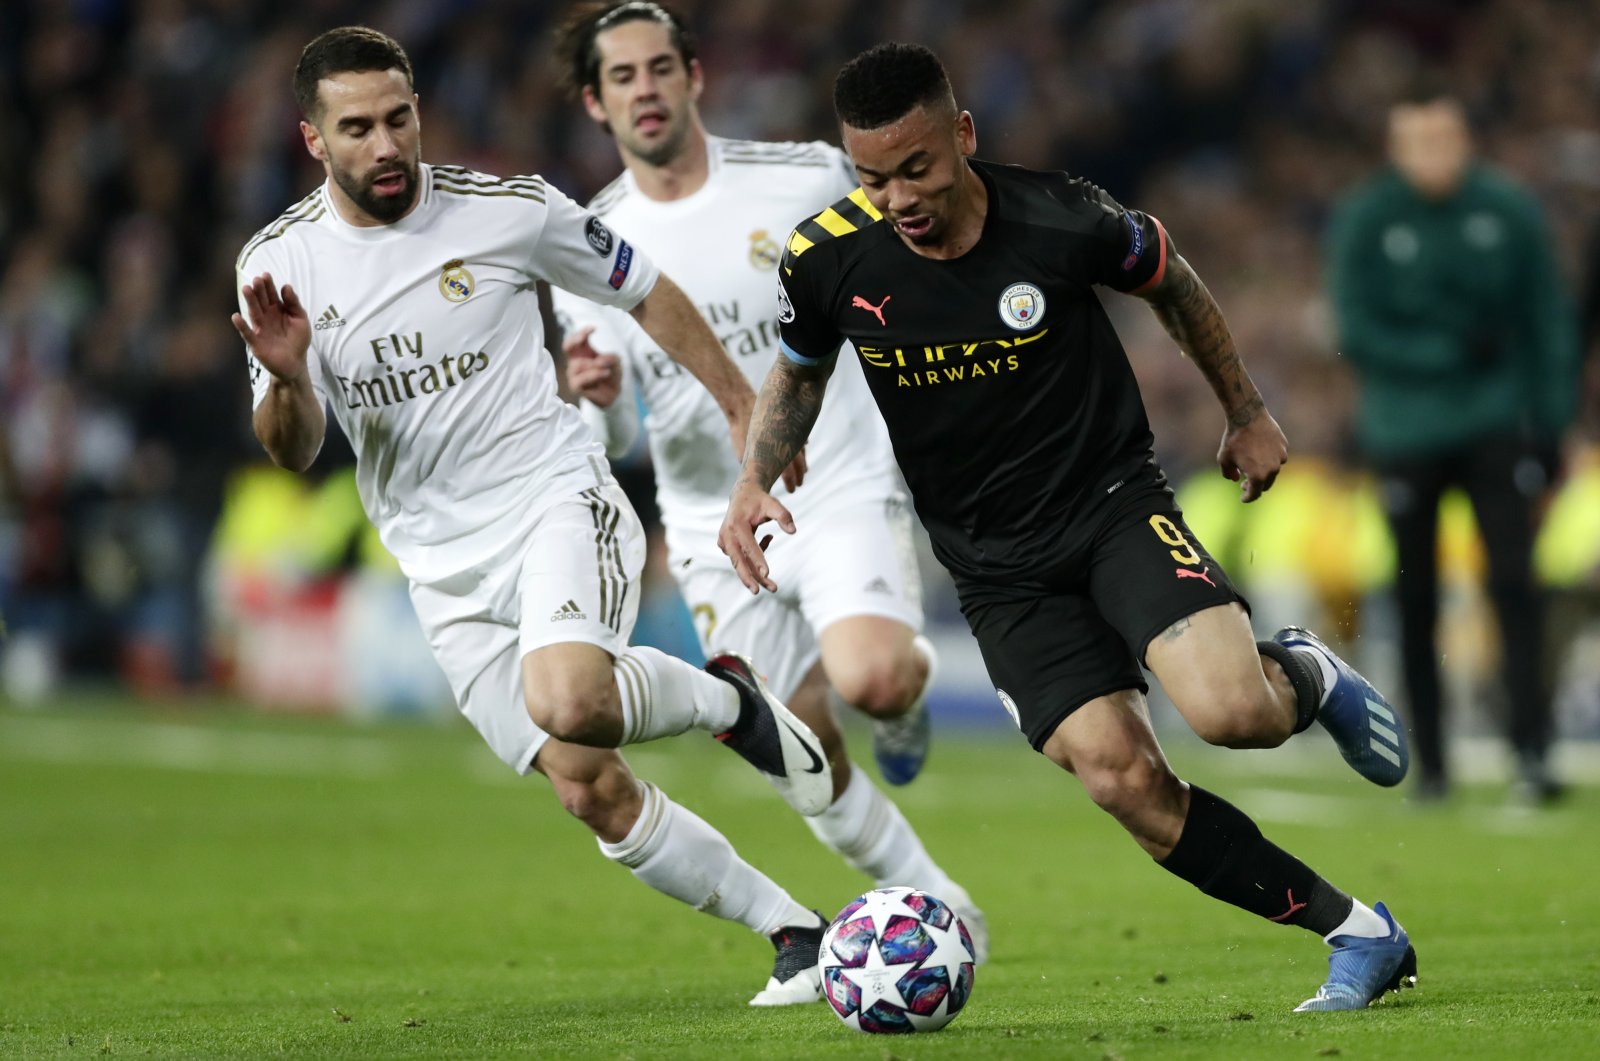 Man City&#039;s Gabriel Jesus (R) vies with Real&#039;s Dani Carvajal during their Champions League match, Madrid, Spain, Feb. 26, 2020. (AP Photo)